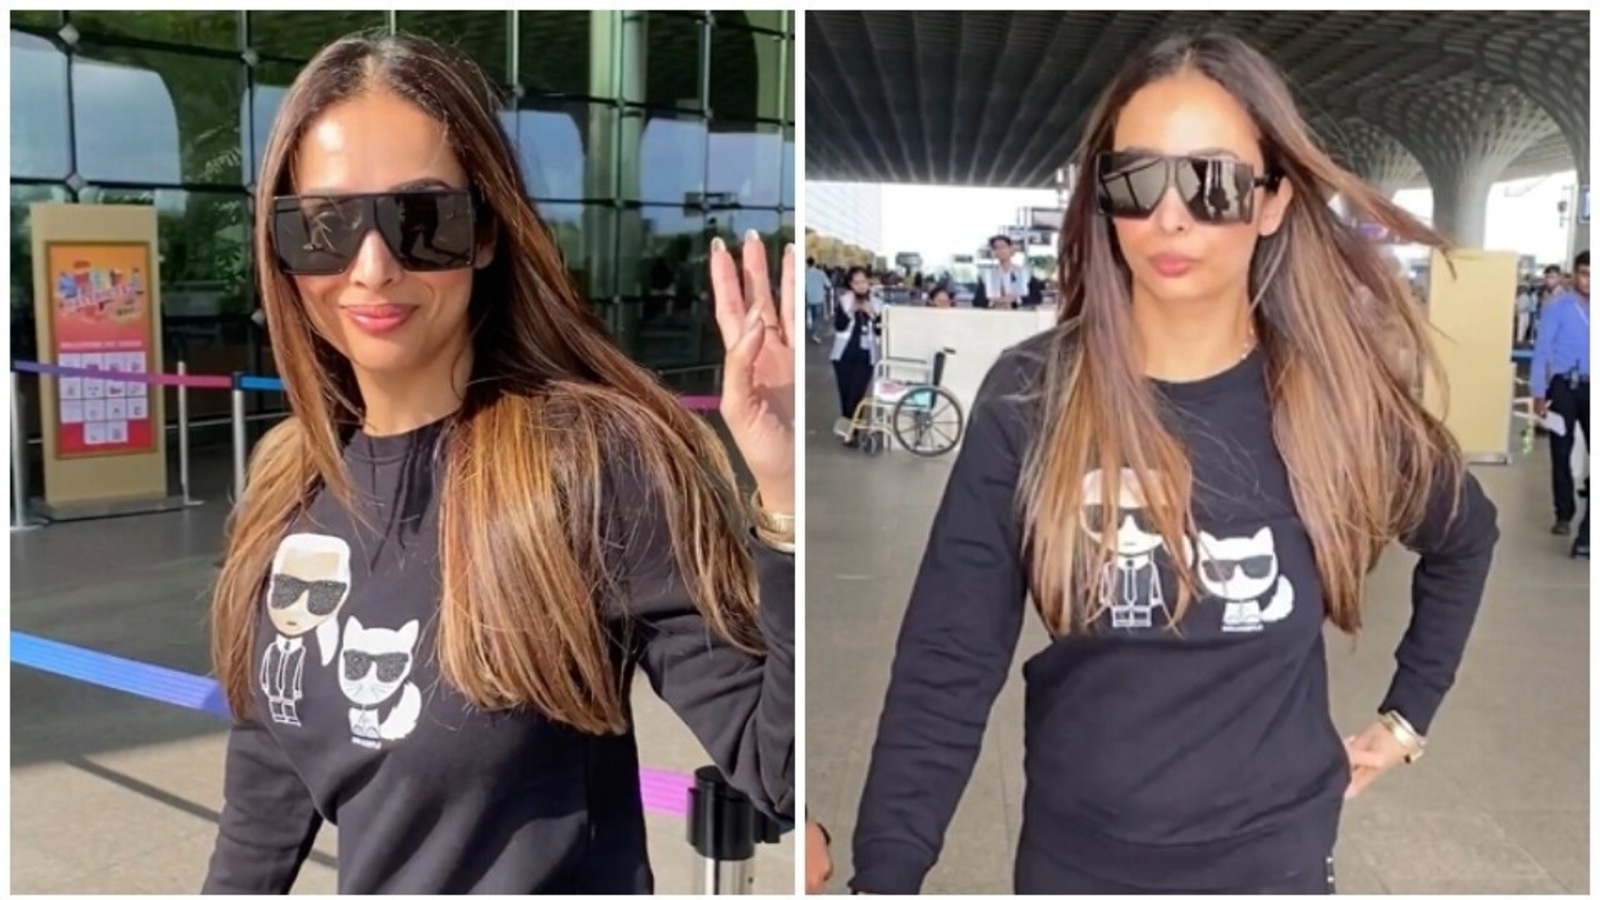 malaika-arora-is-the-queen-of-effortless-airport-fashion-in-sweatshirt-and-tights-with-no-makeup-all-pics-video